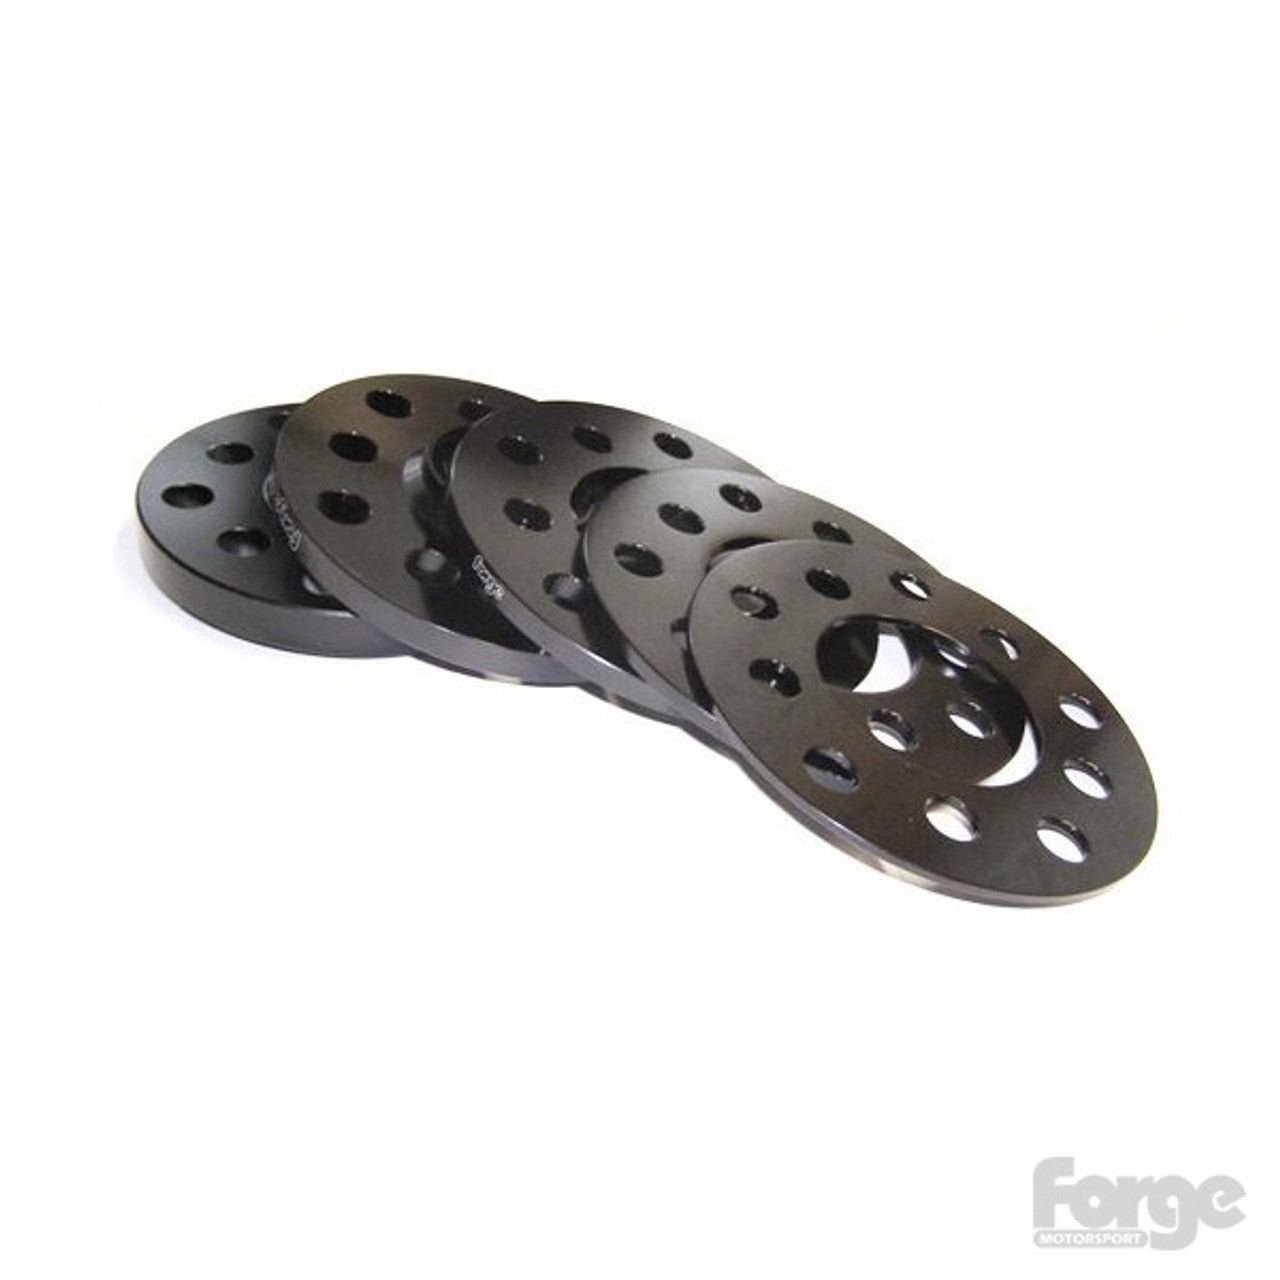 Forge 13mm (per side) hubcentric